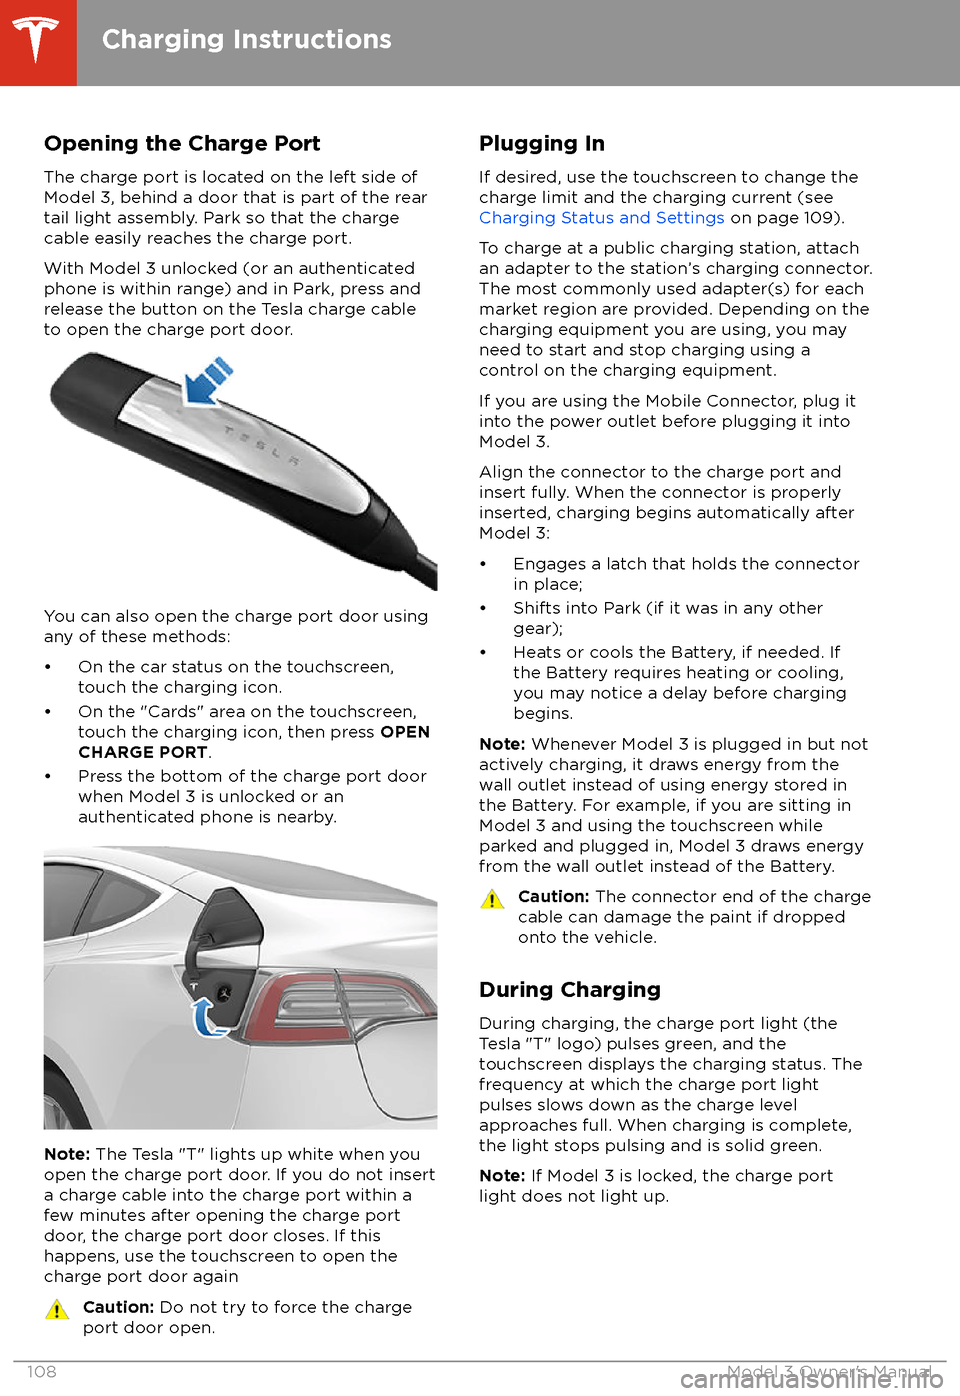 TESLA MODEL 3 2018  Owners Manual Opening the Charge Port
The charge port is located on the left side of
Model 3, behind a door that is part of the rear
tail light assembly. Park so that the charge
cable easily reaches the charge port